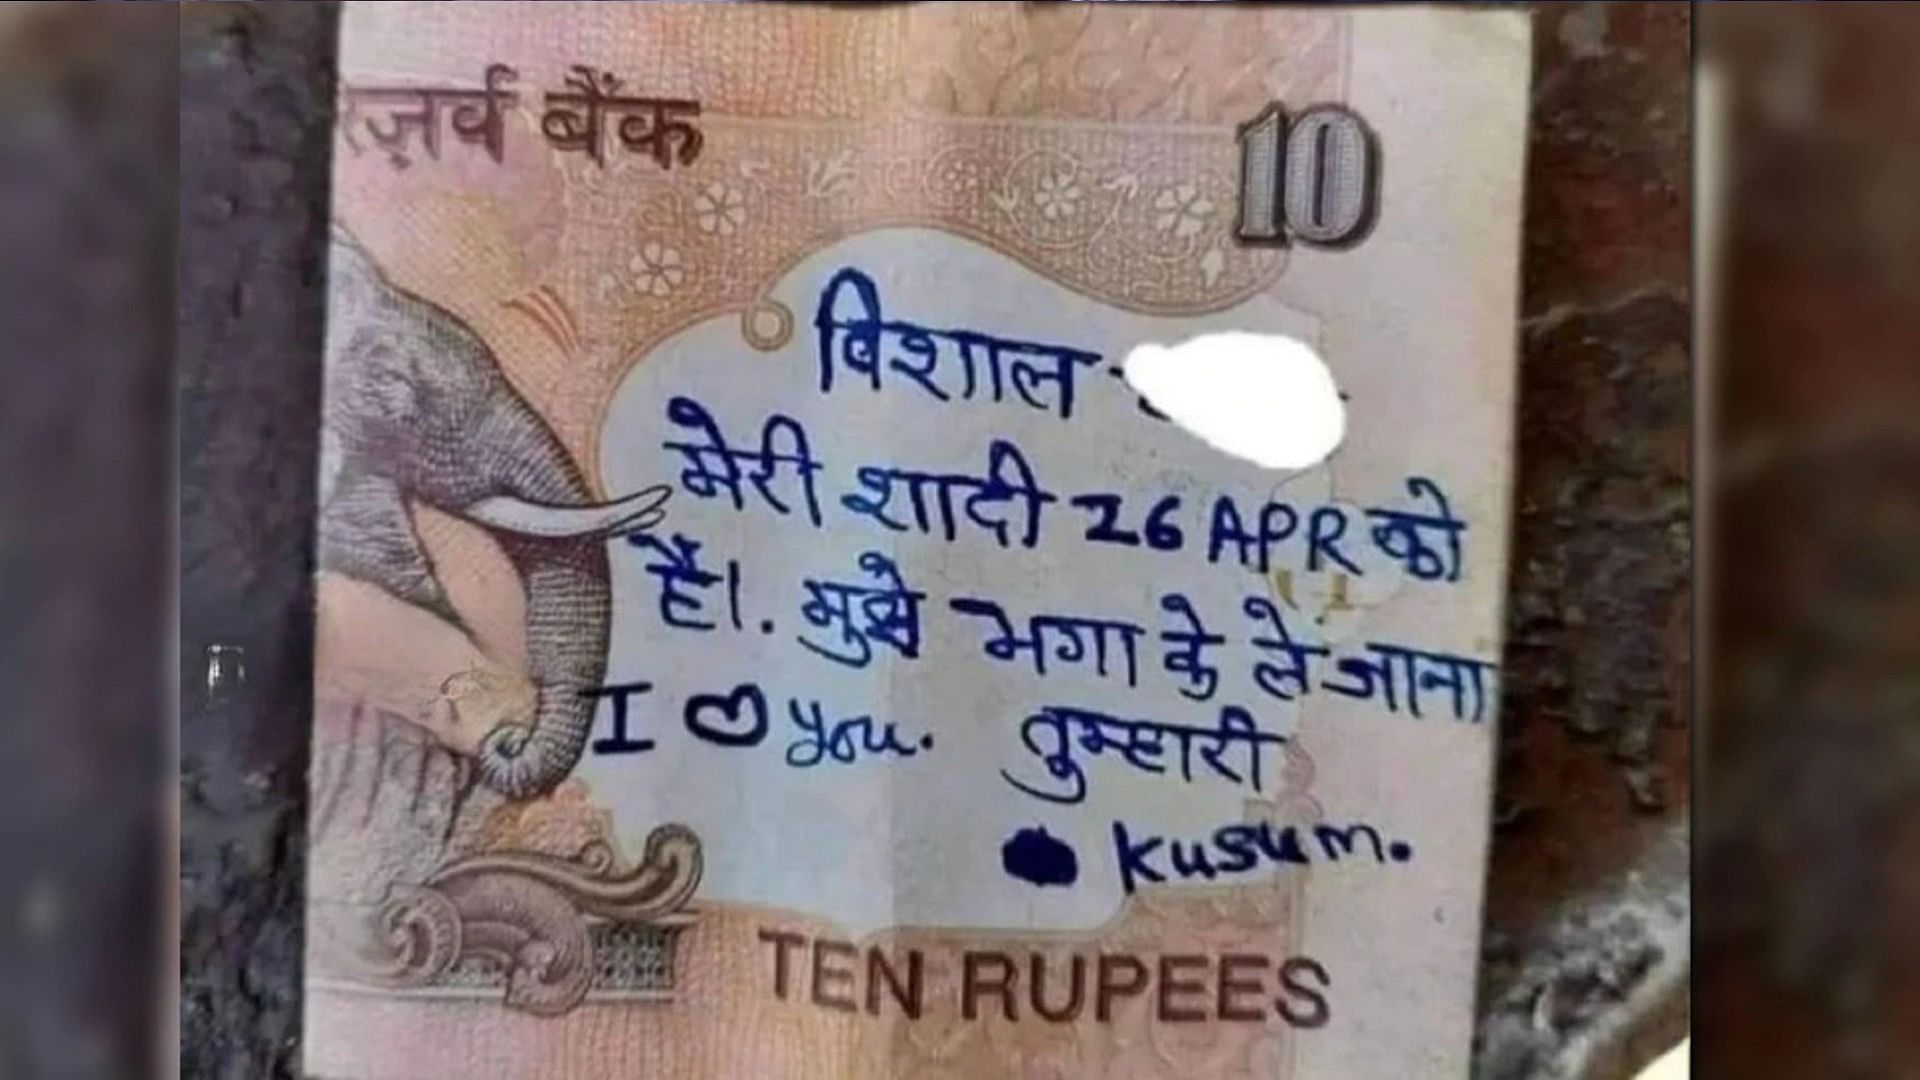 Girlfriend wrote a letter to boyfriend on Rs 10 note picture is going viral on social media